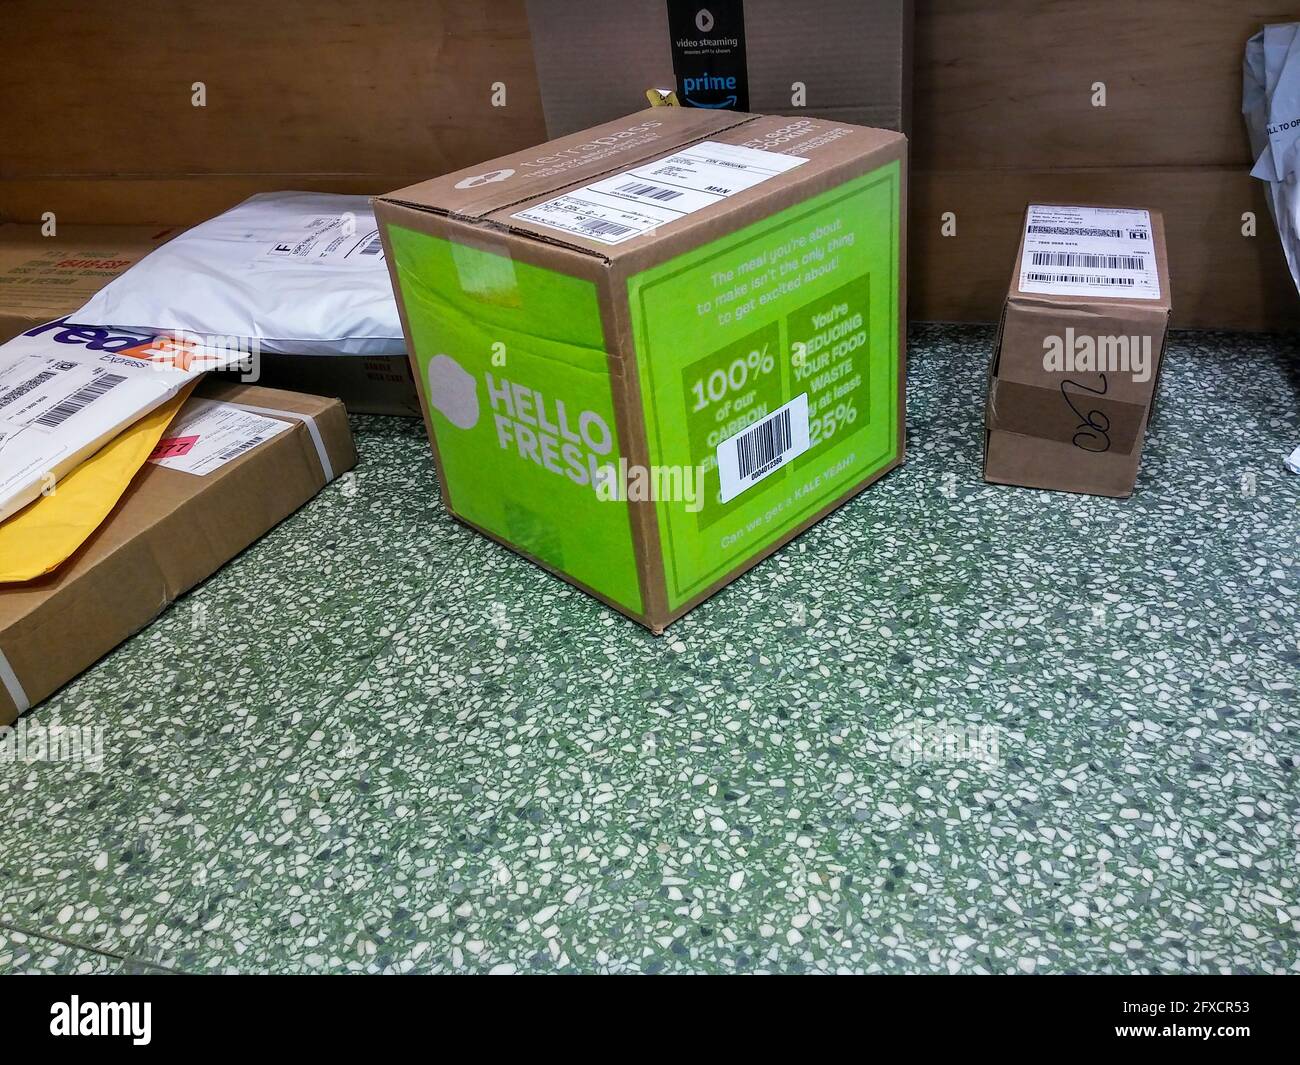 A delivery from the Hello Fresh meal subscription service waits to be picked up in the lobby of an apartment building in New York on Tuesday, May 11, 2021. (© Richard B. Levine) Stock Photo